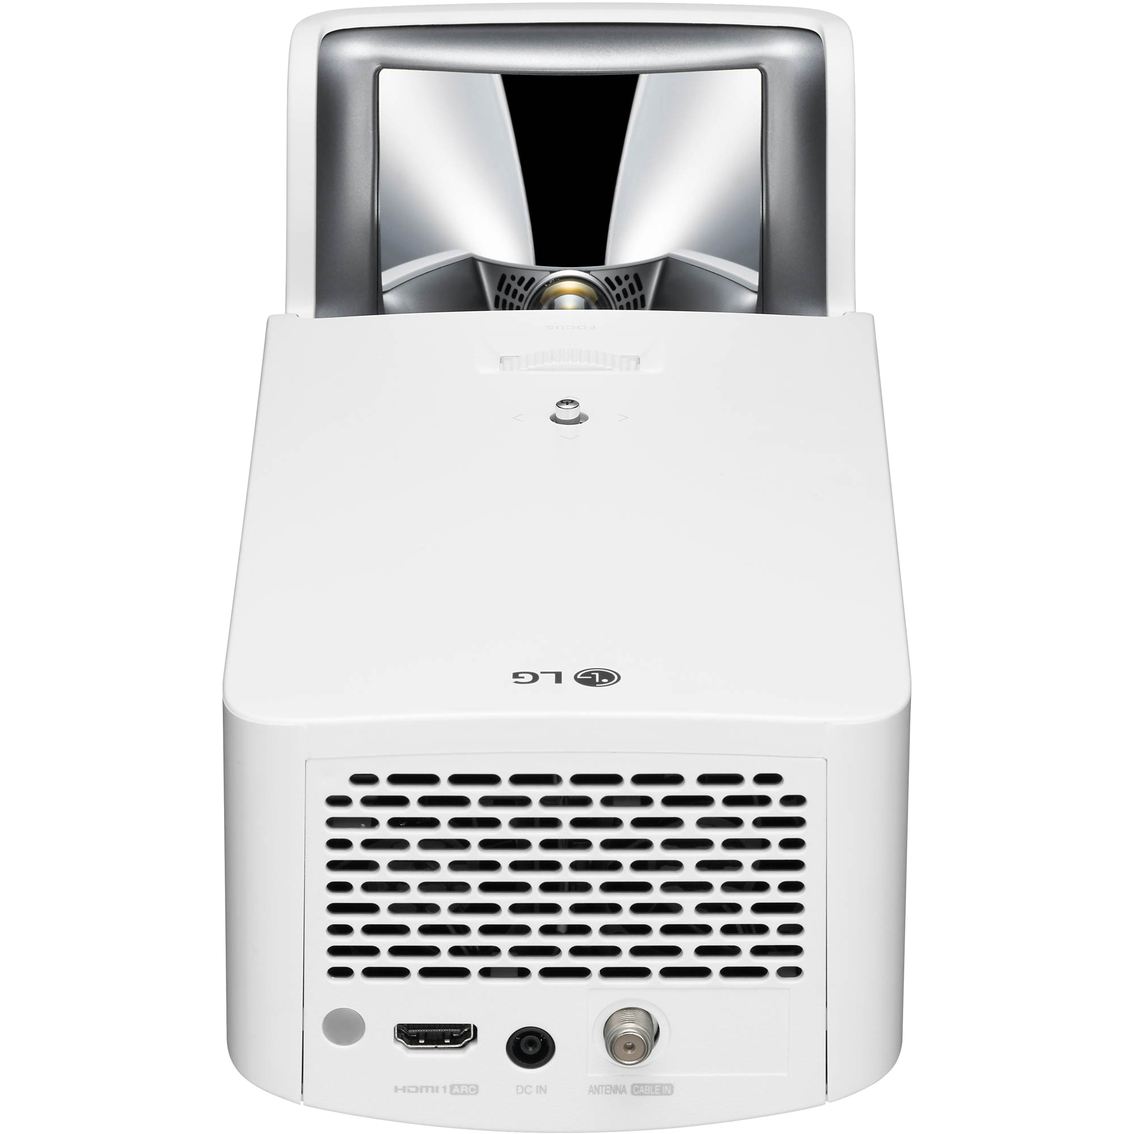 LG HF65LA CineBeam Ultra Short Throw LED Smart Home Theater Projector - Image 8 of 10